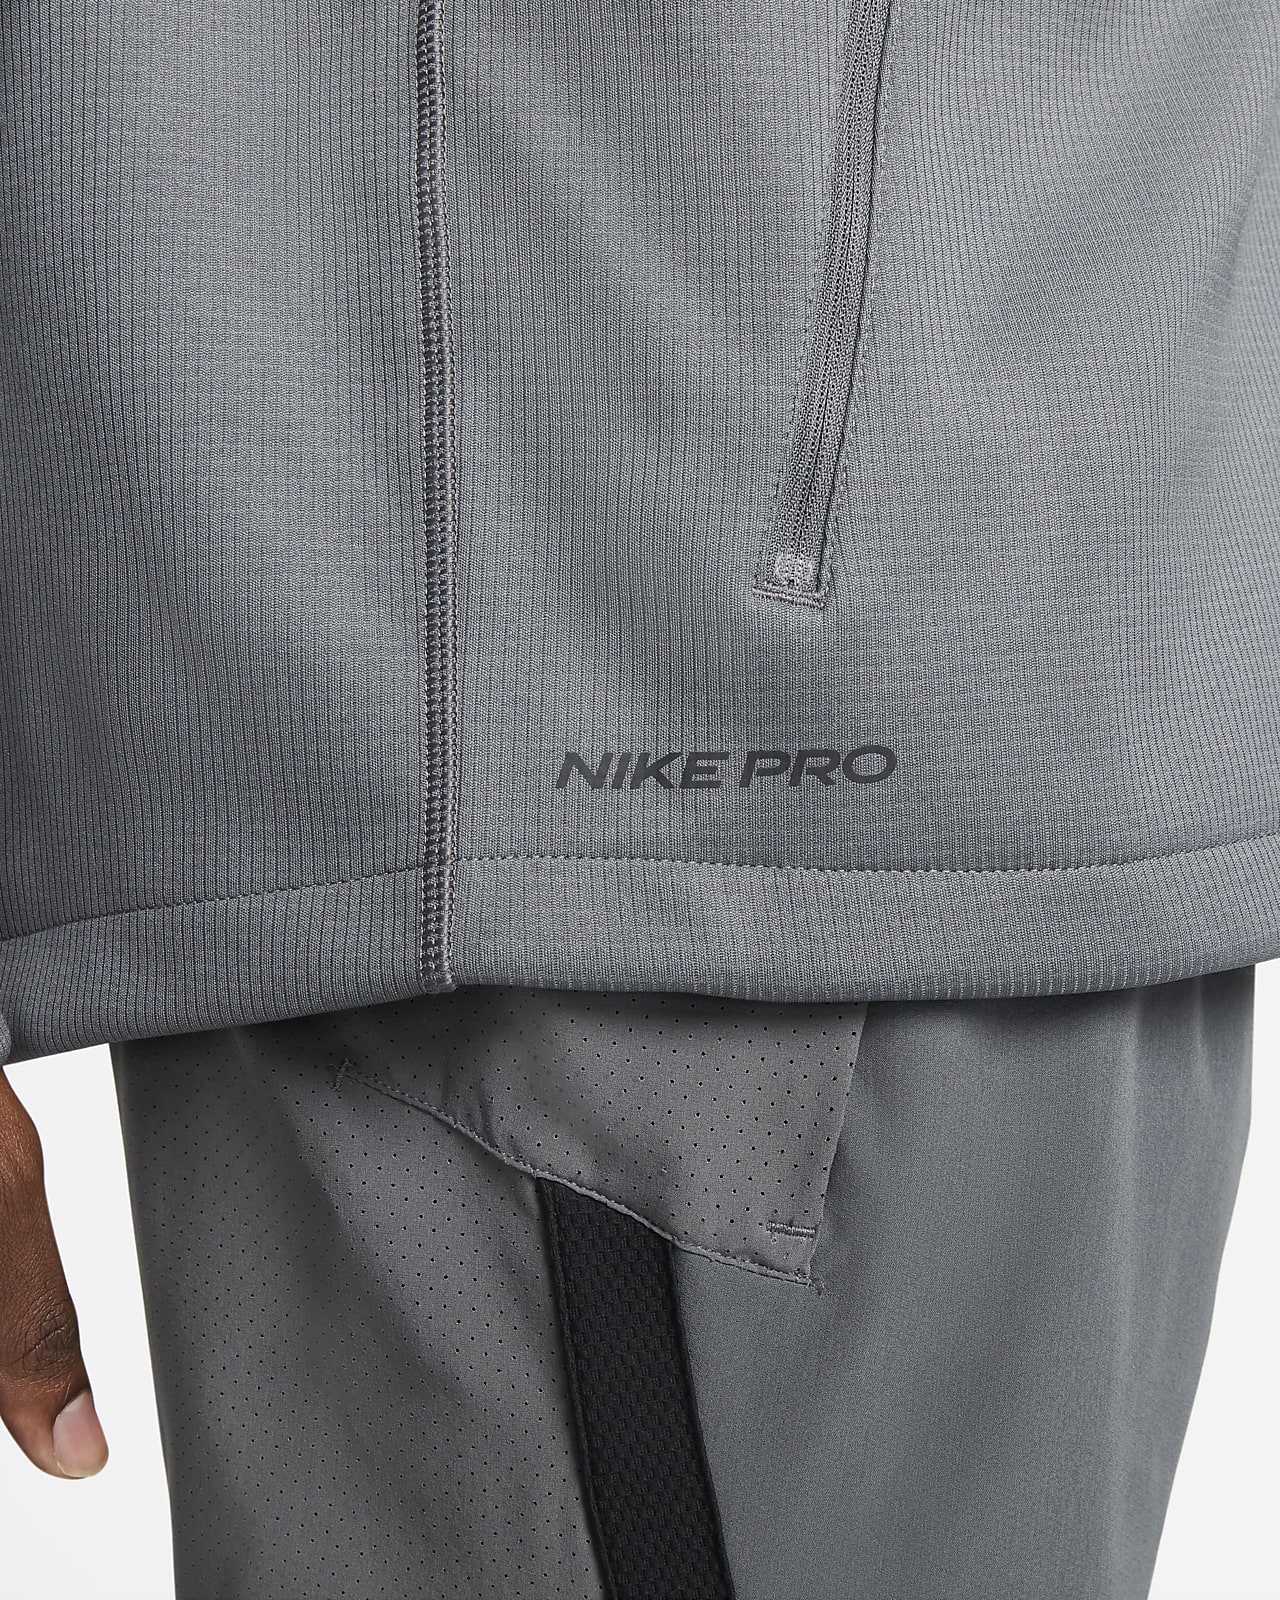 Nike Therma-Sphere Men's Therma-FIT Hooded Fitness Jacket. Nike AT